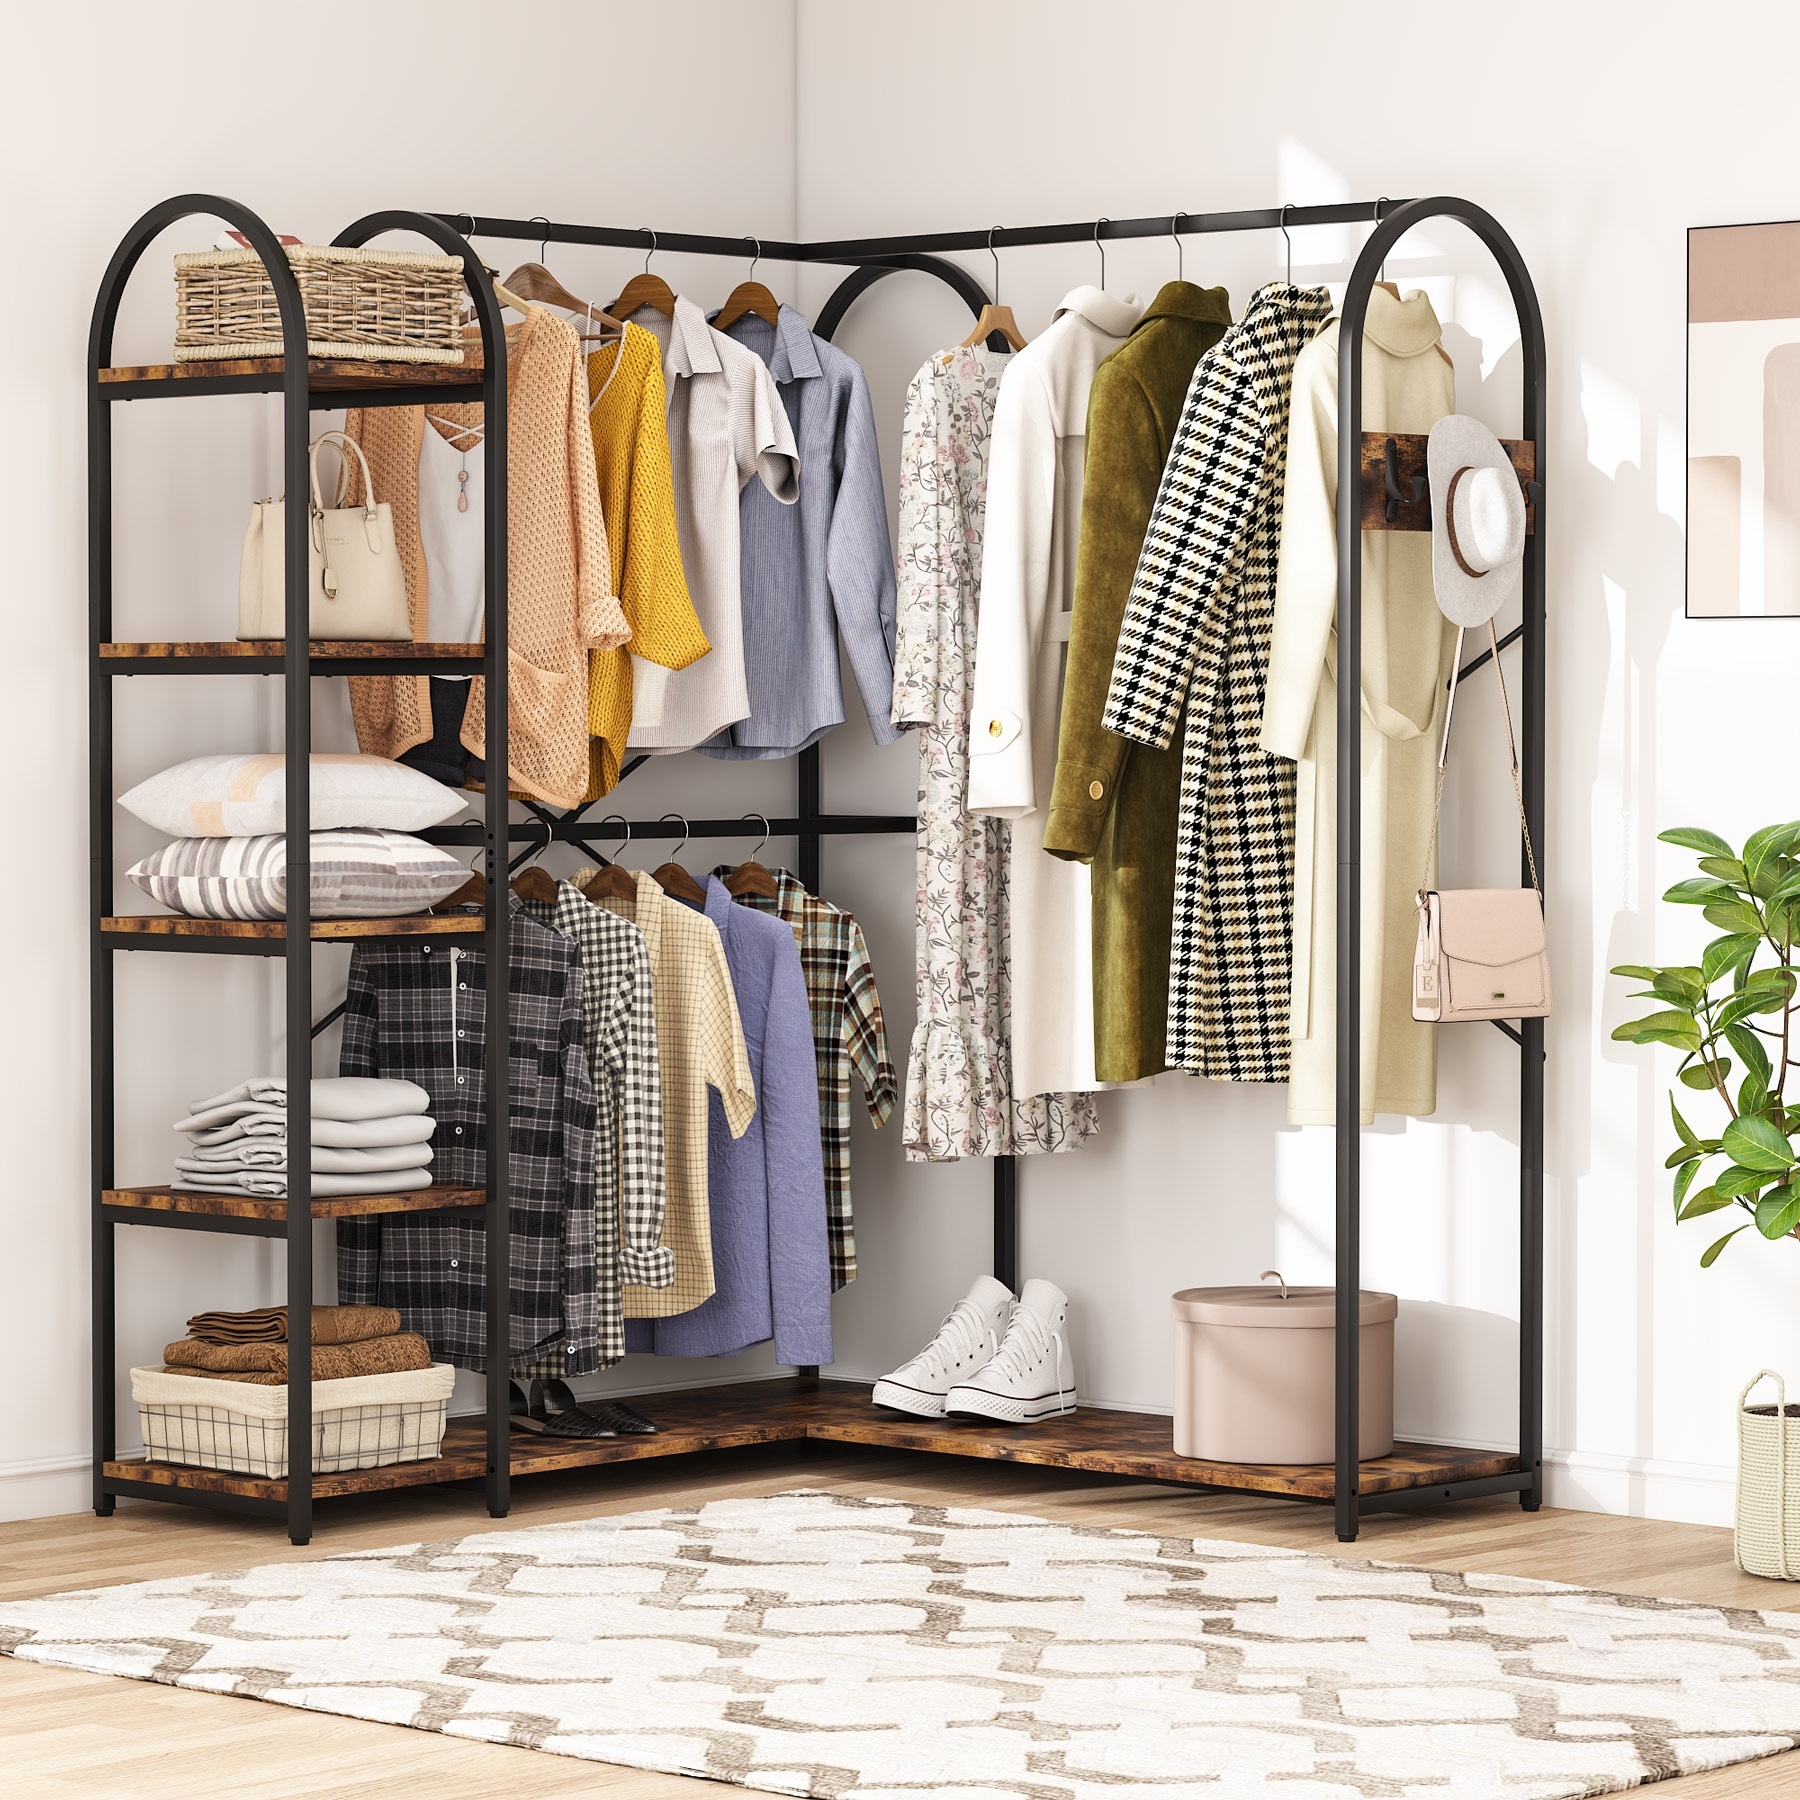 https://ak1.ostkcdn.com/images/products/is/images/direct/f127332b64416ccb6ee3ce934dcb55565bf04a14/Heavy-Duty-L-Shape-Clothes-Rack%2CFreestanding-Corner-Closet-Organizer%2CLarge-Garment-Rack-with-Storage-Shelves-and-Hanging-Rods.jpg